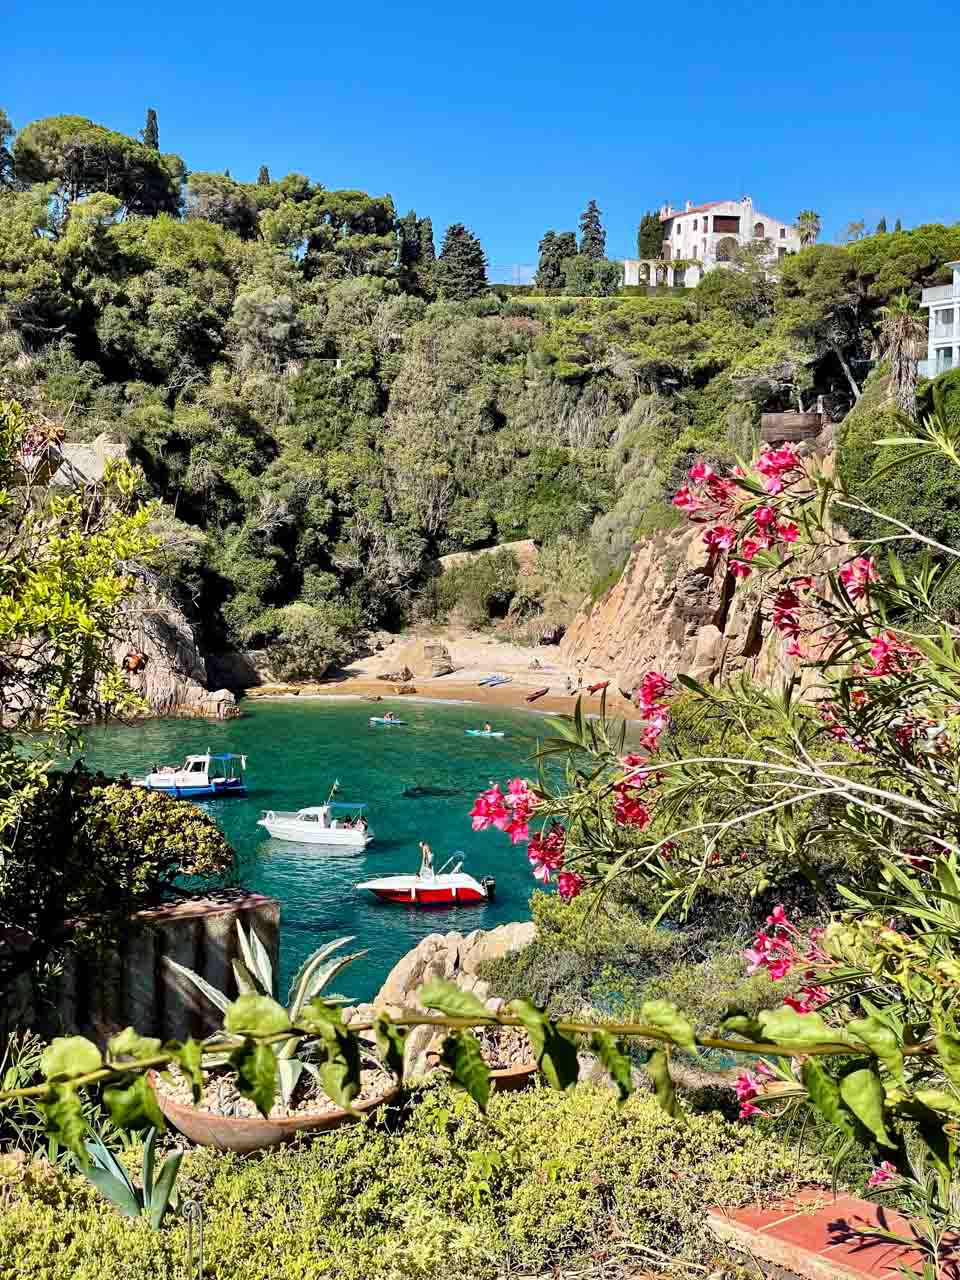 A coastal cove with boats moored and people on paddle boards. The cove is surrounded by houses, greenery, and red flowers.